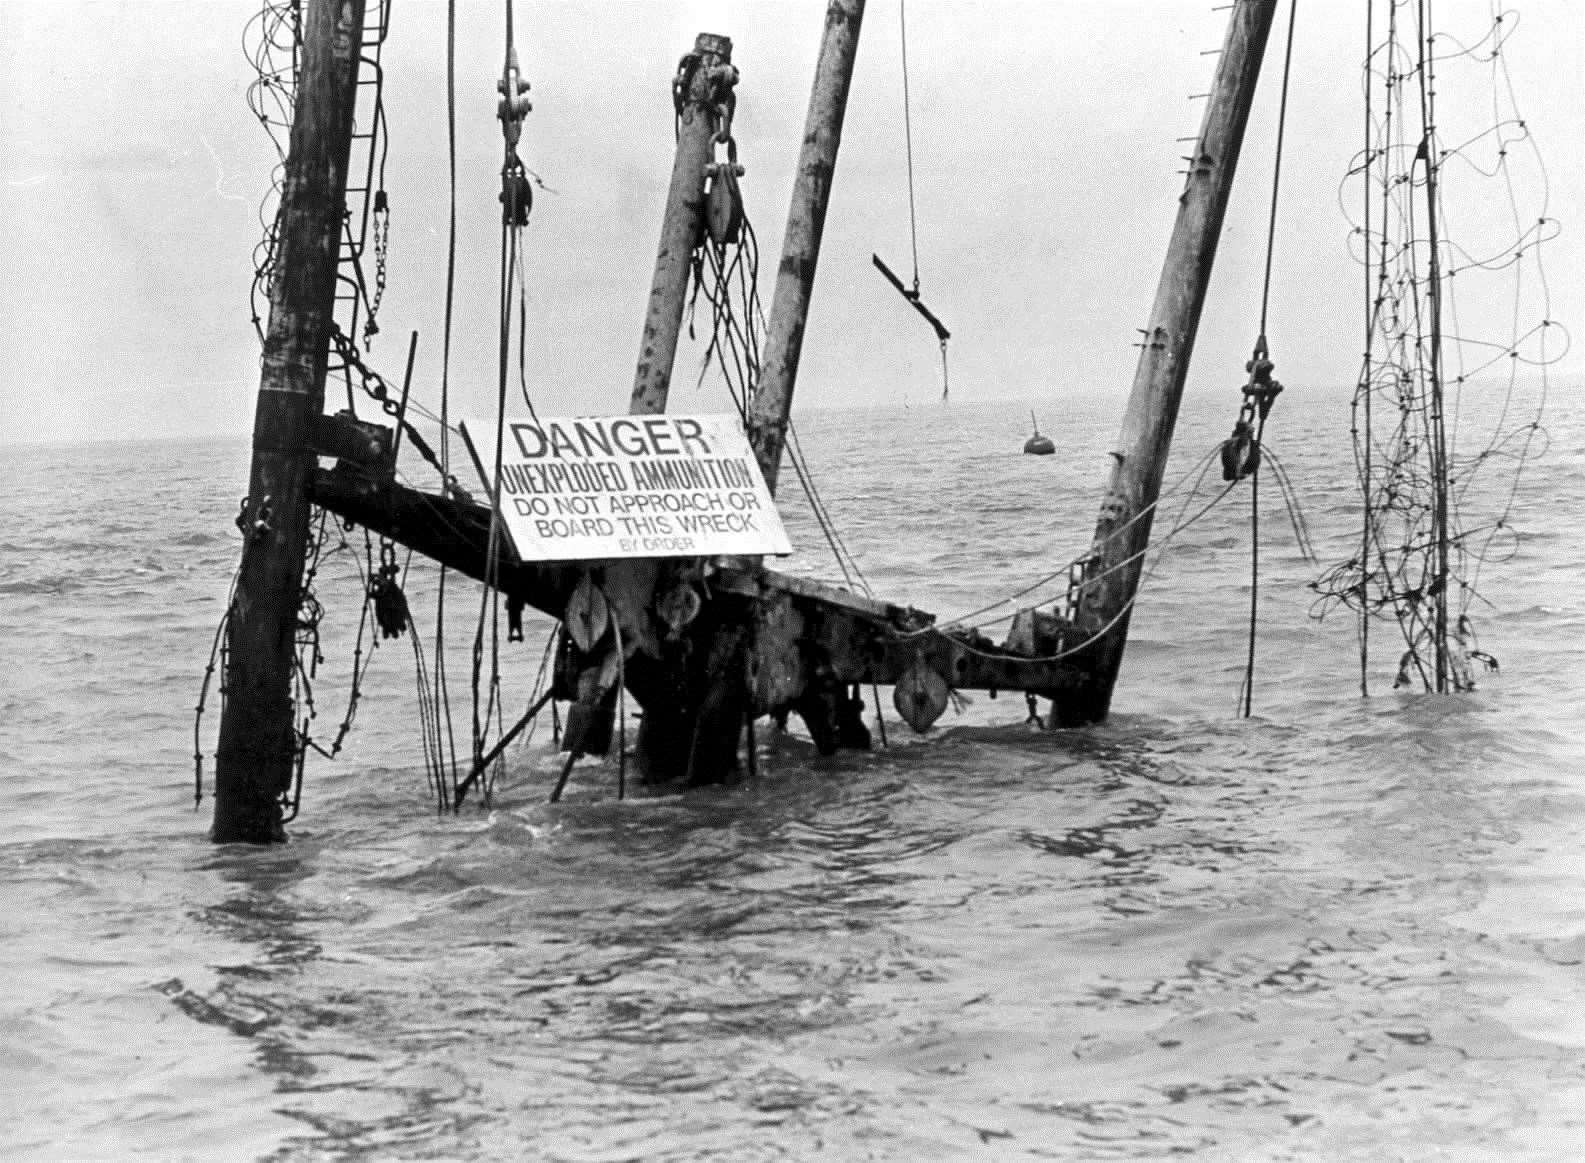 The Richard Montgomery wreck at Sheerness. August 30, 1978 (13397140)